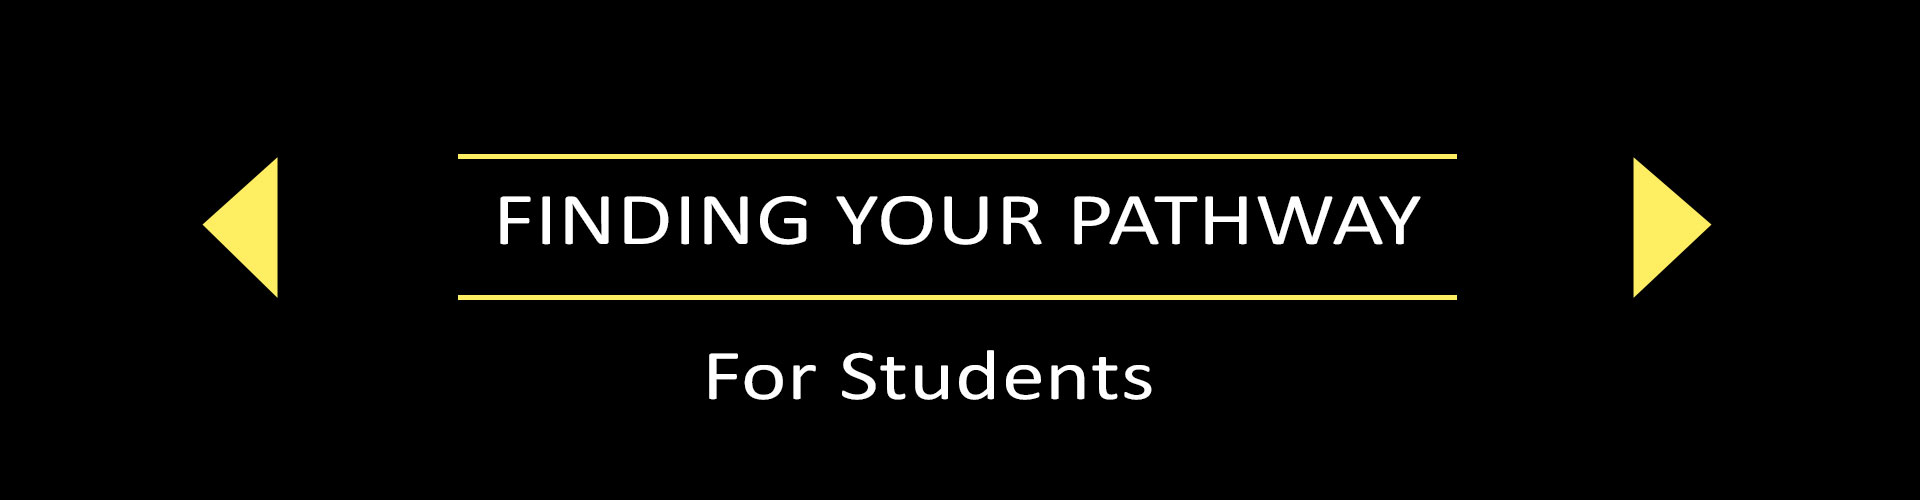 Finding Your Pathway for Students